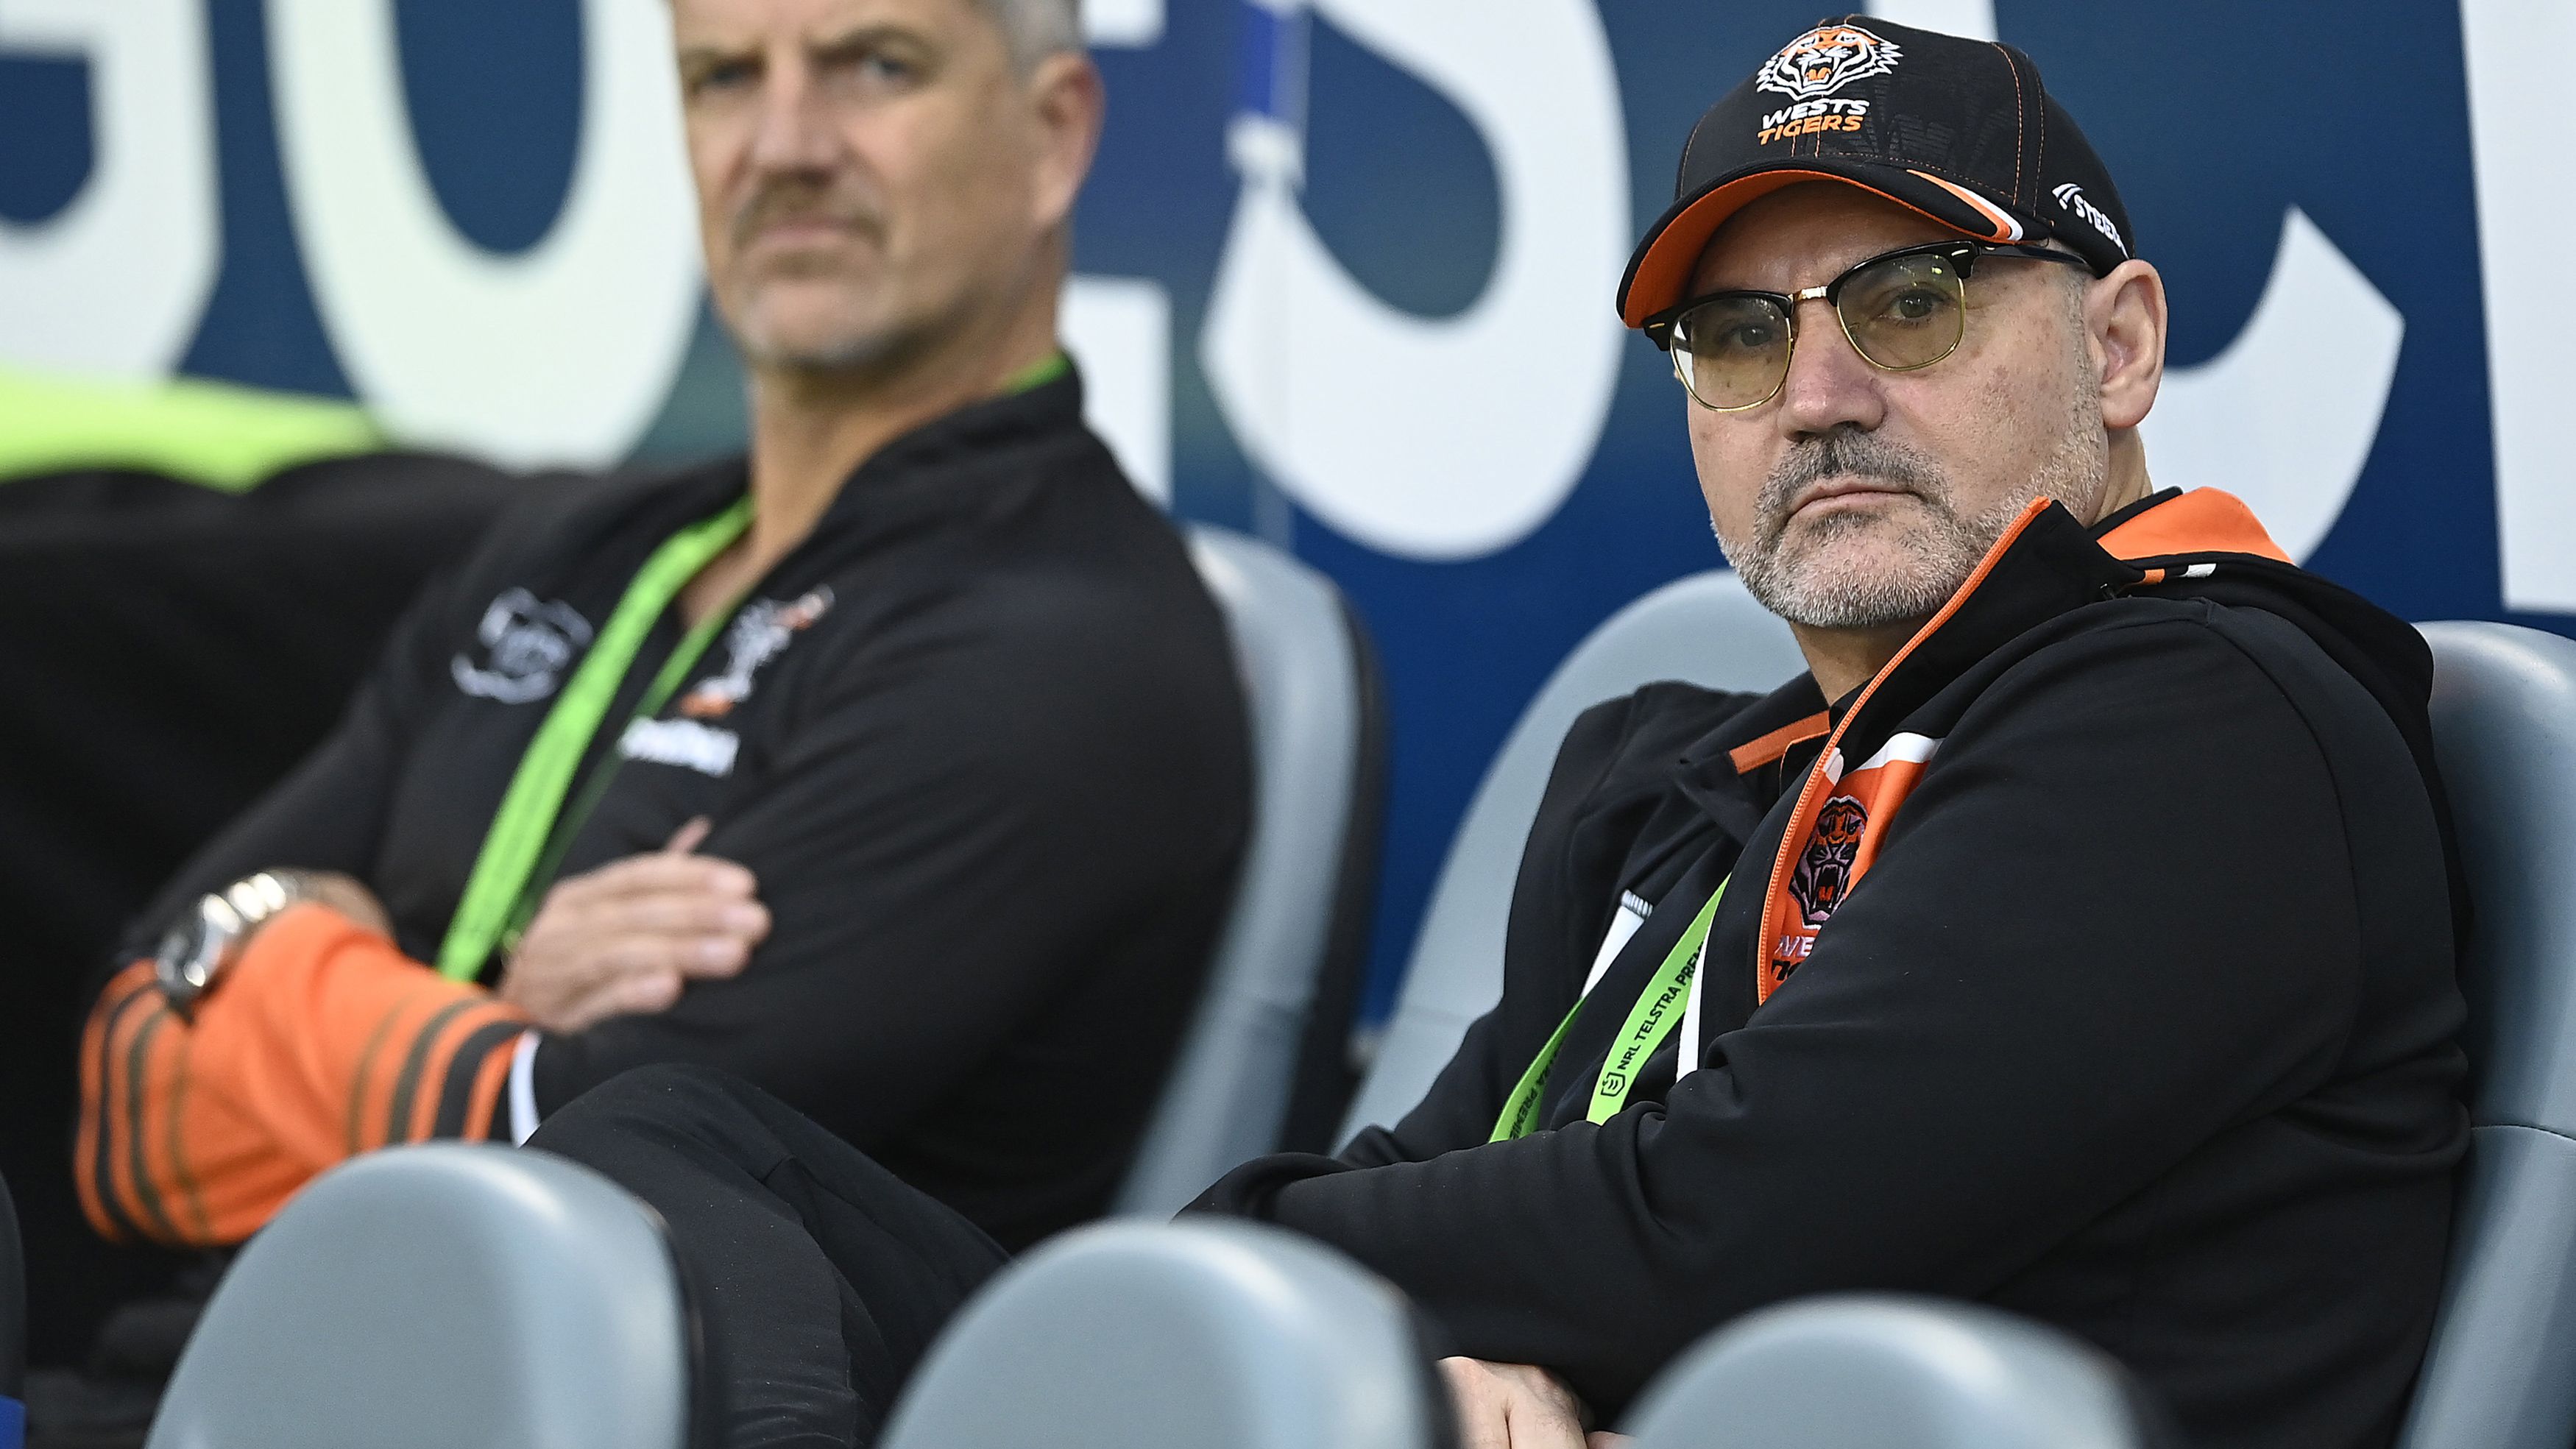 'Defamed' Wests Tigers chairman threatens to sue fan podcast over comments